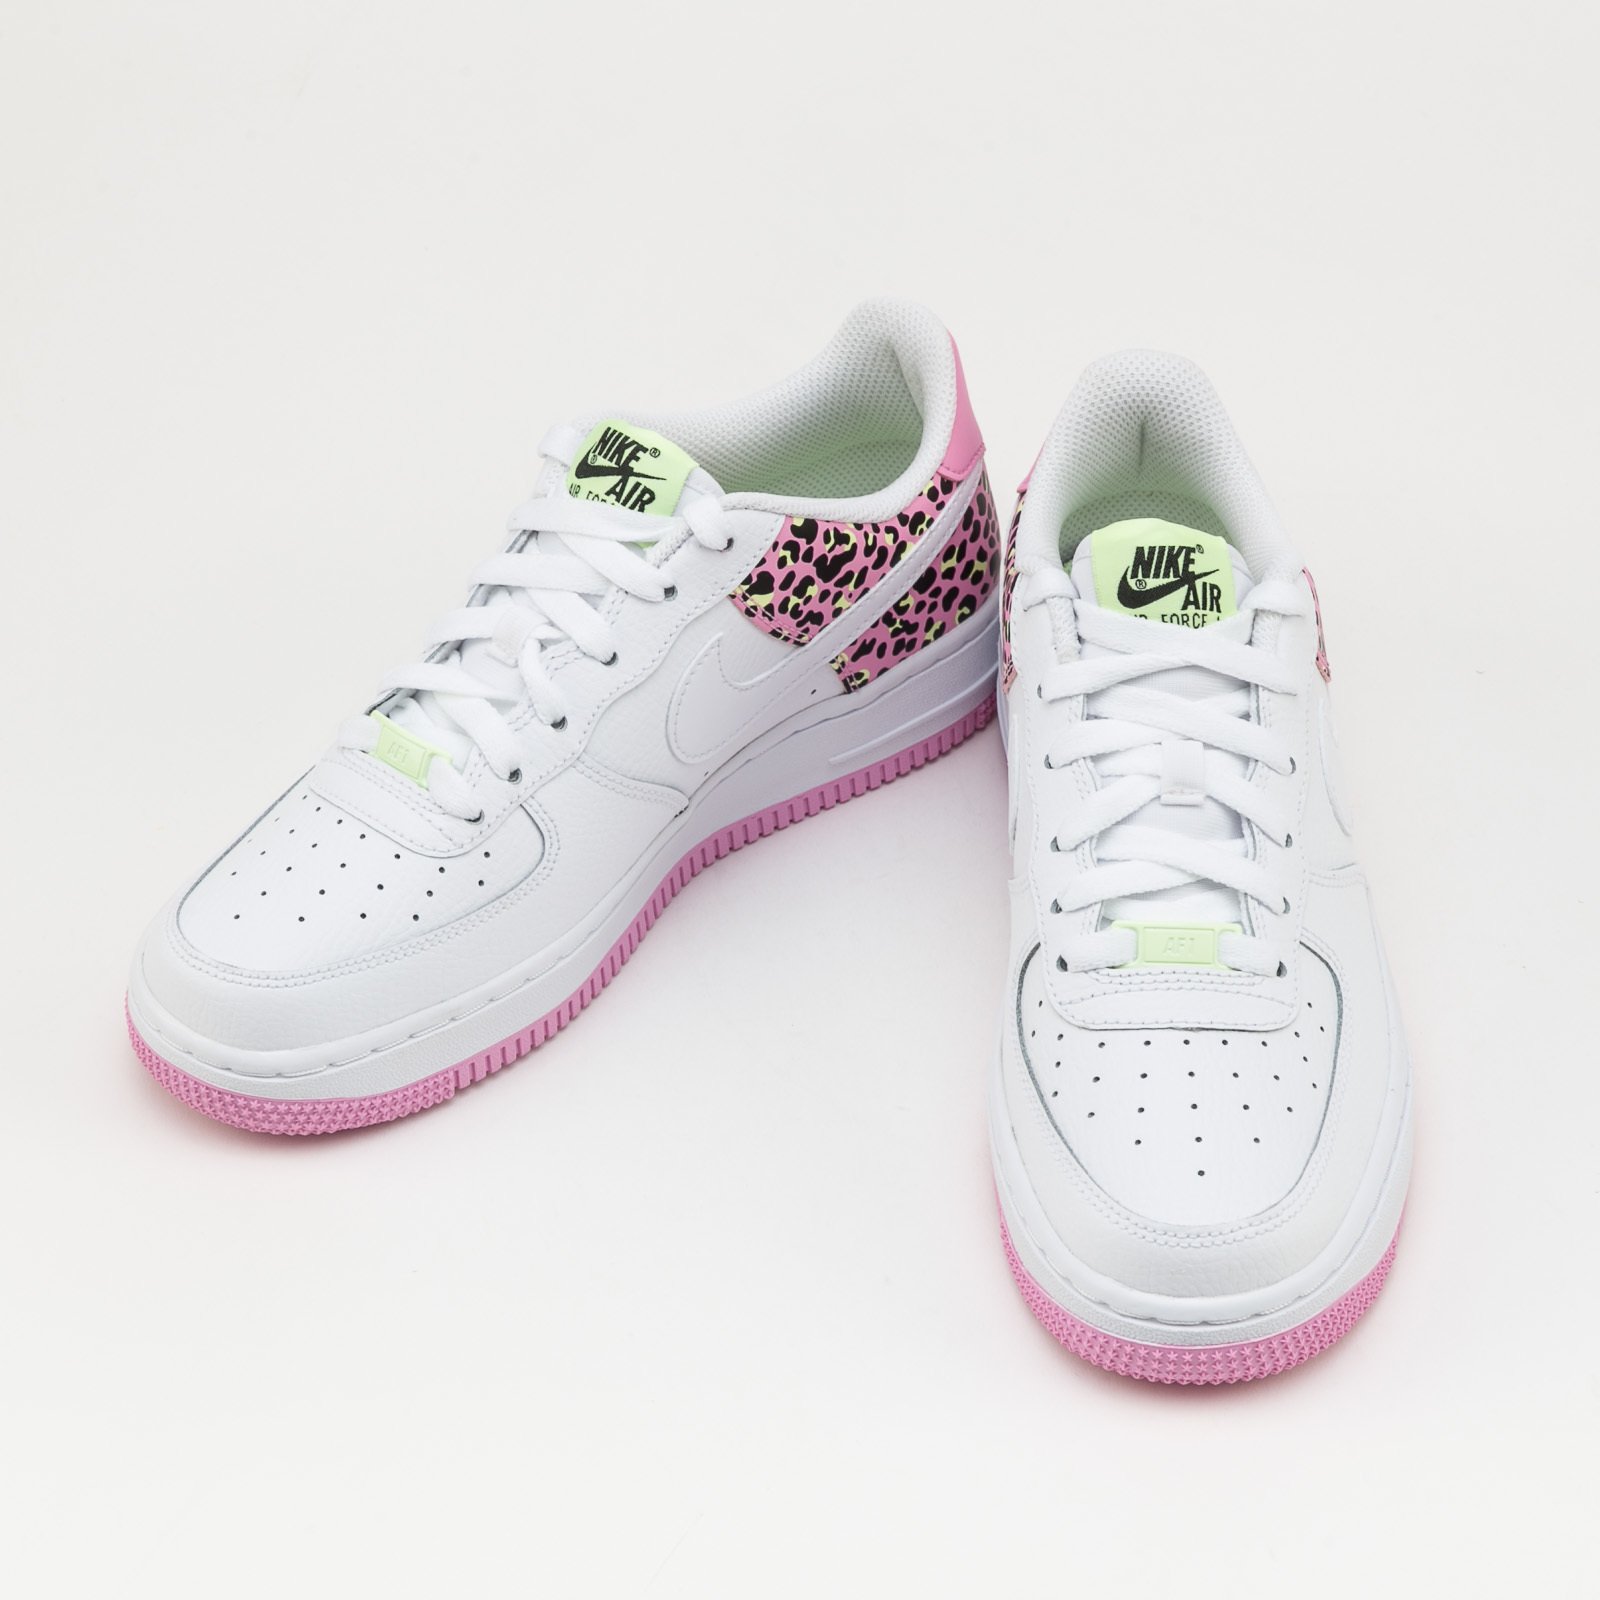 Air Force 1 '07 "Pink Leopard" GS